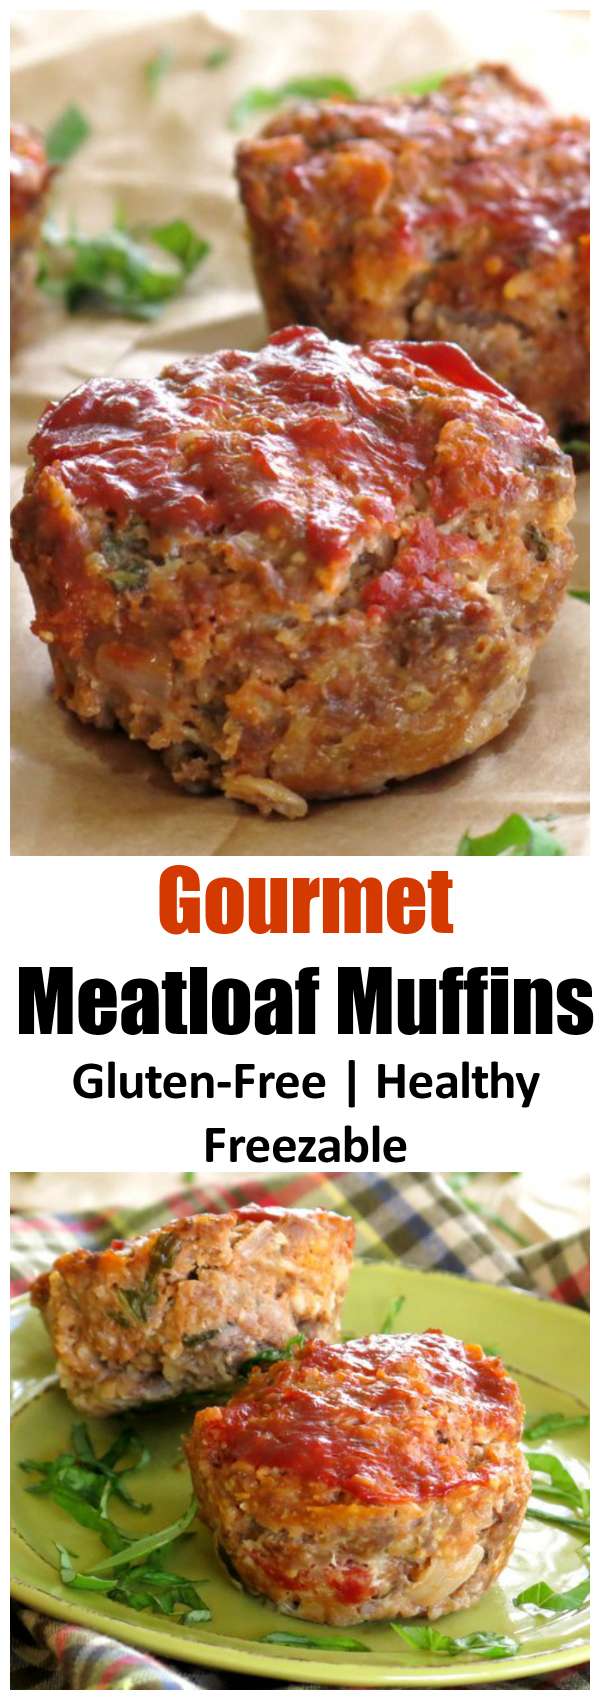 Gourmet Meatloaf with Sundried Tomatoes - The Dinner-Mom